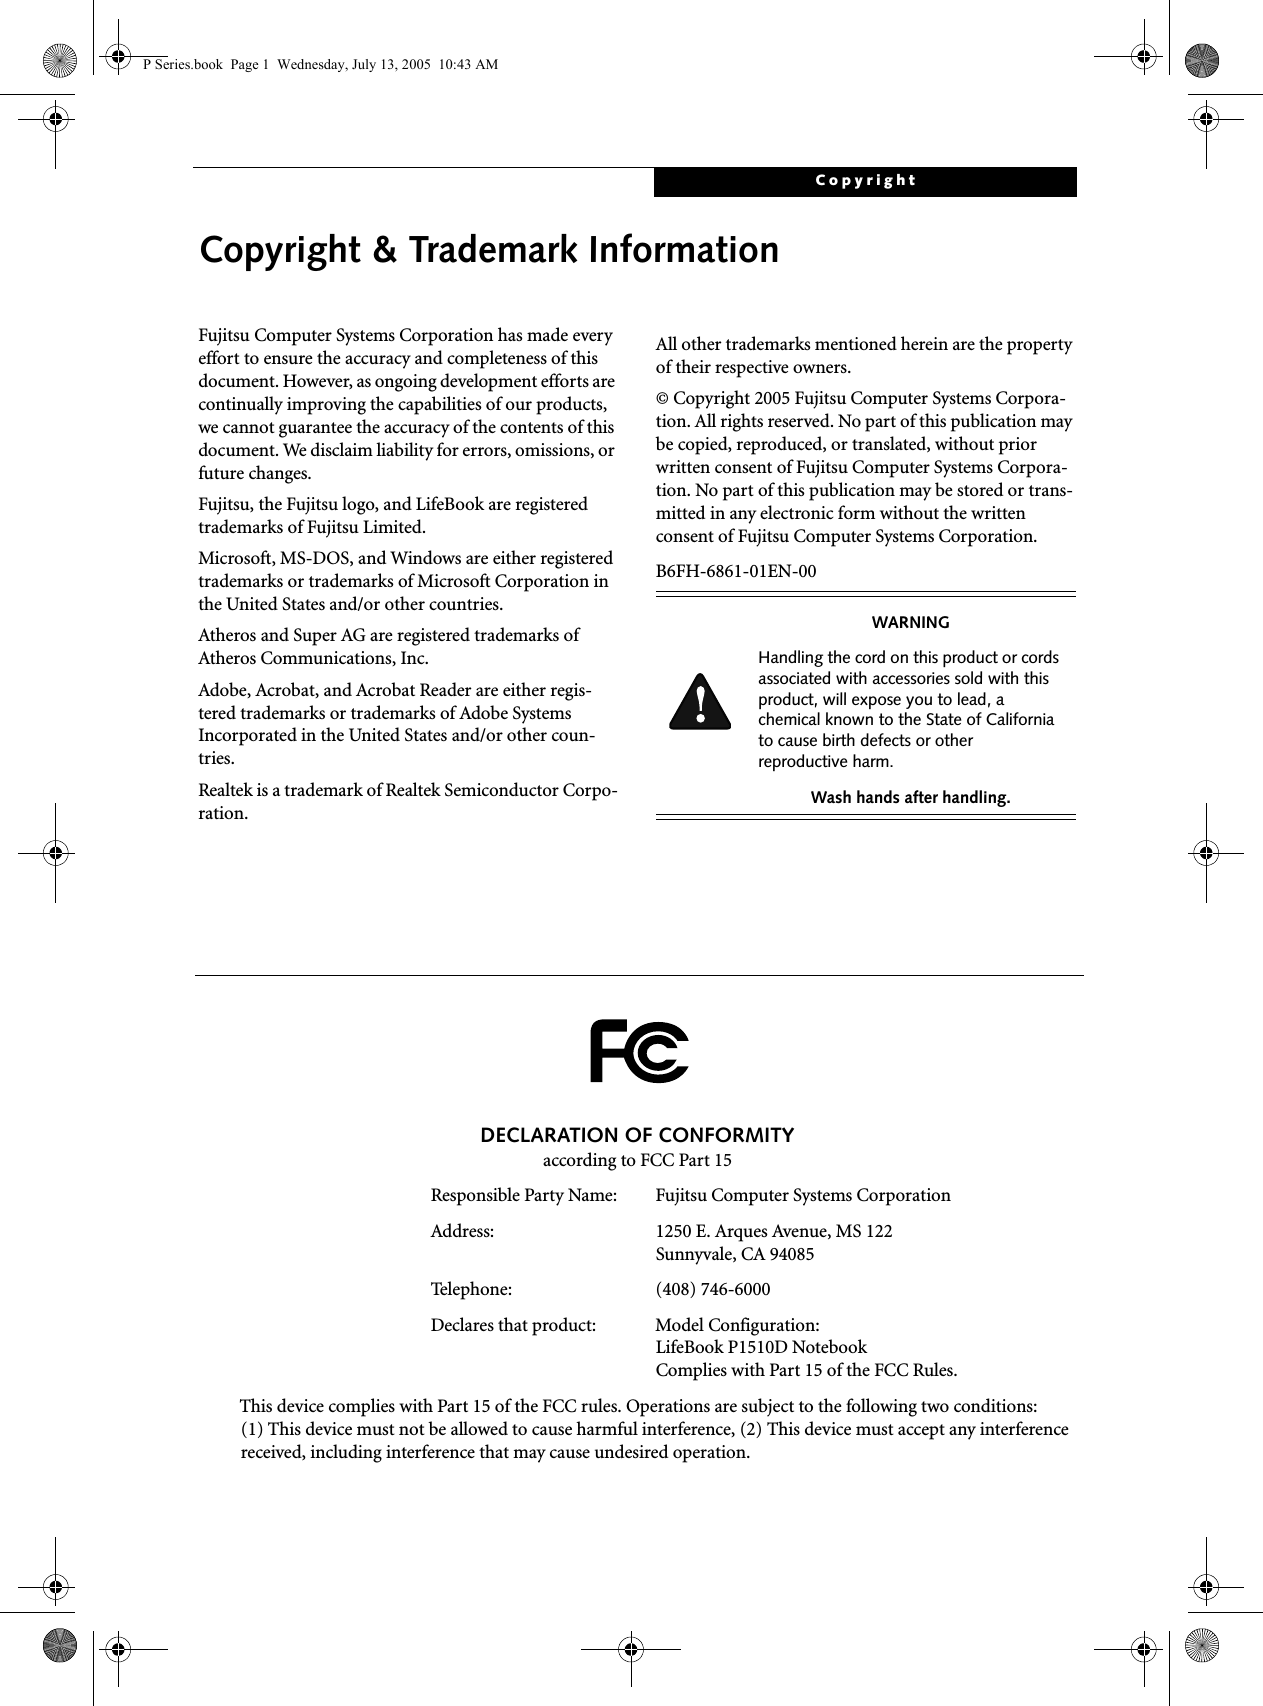 CopyrightCopyright &amp; Trademark InformationFujitsu Computer Systems Corporation has made every effort to ensure the accuracy and completeness of this document. However, as ongoing development efforts are continually improving the capabilities of our products, we cannot guarantee the accuracy of the contents of this document. We disclaim liability for errors, omissions, or future changes.Fujitsu, the Fujitsu logo, and LifeBook are registered trademarks of Fujitsu Limited.Microsoft, MS-DOS, and Windows are either registered trademarks or trademarks of Microsoft Corporation in the United States and/or other countries.Atheros and Super AG are registered trademarks of Atheros Communications, Inc.Adobe, Acrobat, and Acrobat Reader are either regis-tered trademarks or trademarks of Adobe Systems Incorporated in the United States and/or other coun-tries.Realtek is a trademark of Realtek Semiconductor Corpo-ration.  All other trademarks mentioned herein are the property of their respective owners.© Copyright 2005 Fujitsu Computer Systems Corpora-tion. All rights reserved. No part of this publication may be copied, reproduced, or translated, without prior written consent of Fujitsu Computer Systems Corpora-tion. No part of this publication may be stored or trans-mitted in any electronic form without the written consent of Fujitsu Computer Systems Corporation.B6FH-6861-01EN-00WARNINGHandling the cord on this product or cords associated with accessories sold with this product, will expose you to lead, a chemical known to the State of California to cause birth defects or other reproductive harm. Wash hands after handling.DECLARATION OF CONFORMITYaccording to FCC Part 15Responsible Party Name: Fujitsu Computer Systems CorporationAddress:  1250 E. Arques Avenue, MS 122Sunnyvale, CA 94085Telephone: (408) 746-6000Declares that product: Model Configuration:LifeBook P1510D Notebook Complies with Part 15 of the FCC Rules.This device complies with Part 15 of the FCC rules. Operations are subject to the following two conditions:(1) This device must not be allowed to cause harmful interference, (2) This device must accept any interference received, including interference that may cause undesired operation.P Series.book  Page 1  Wednesday, July 13, 2005  10:43 AM